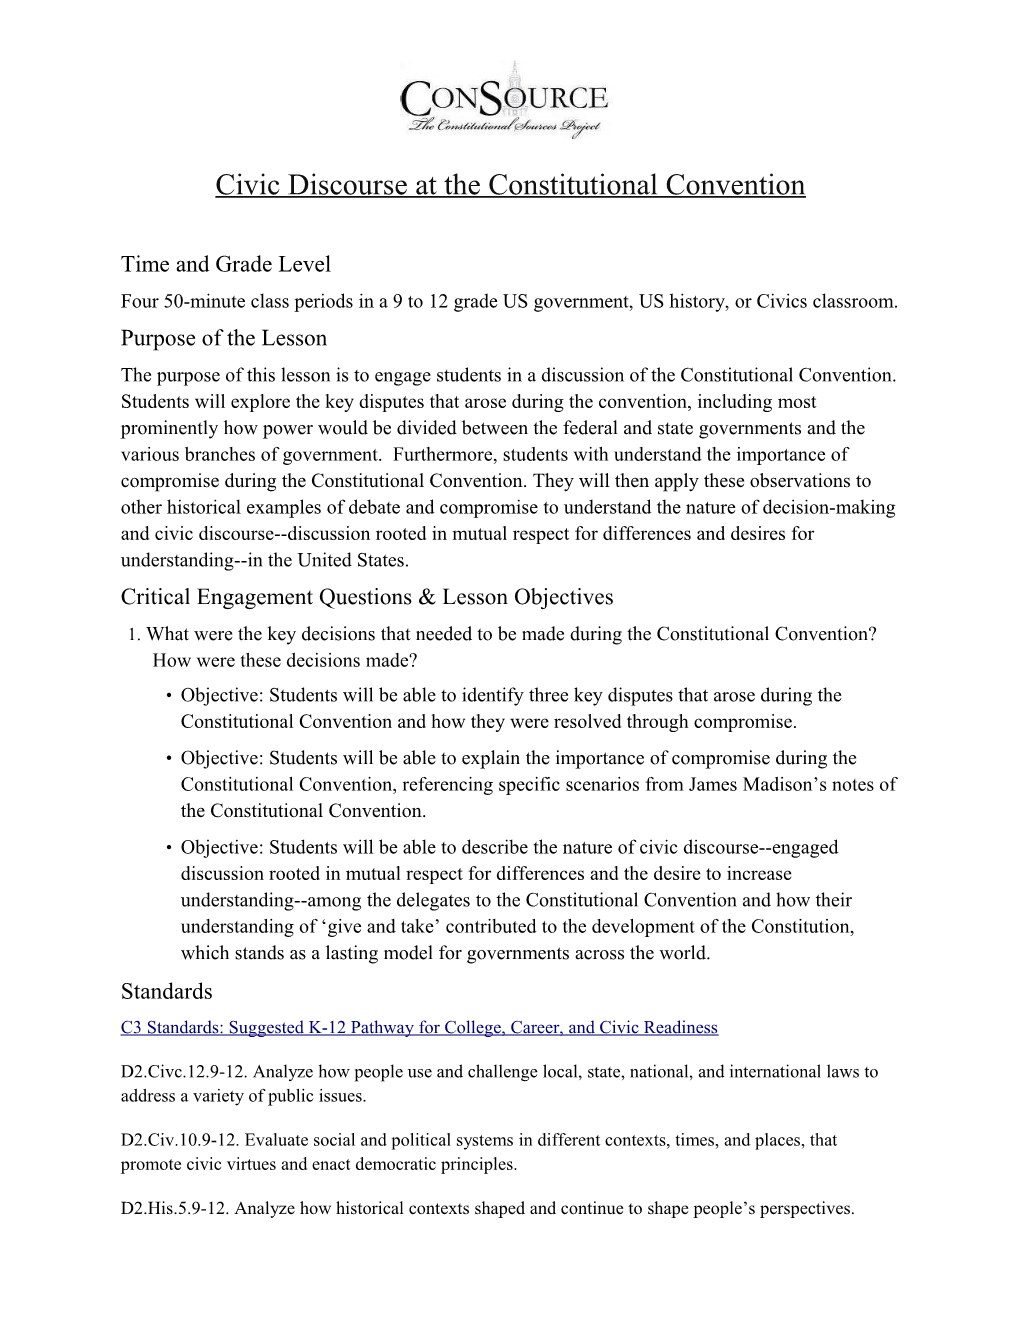 Civic Discourse at the Constitutional Convention